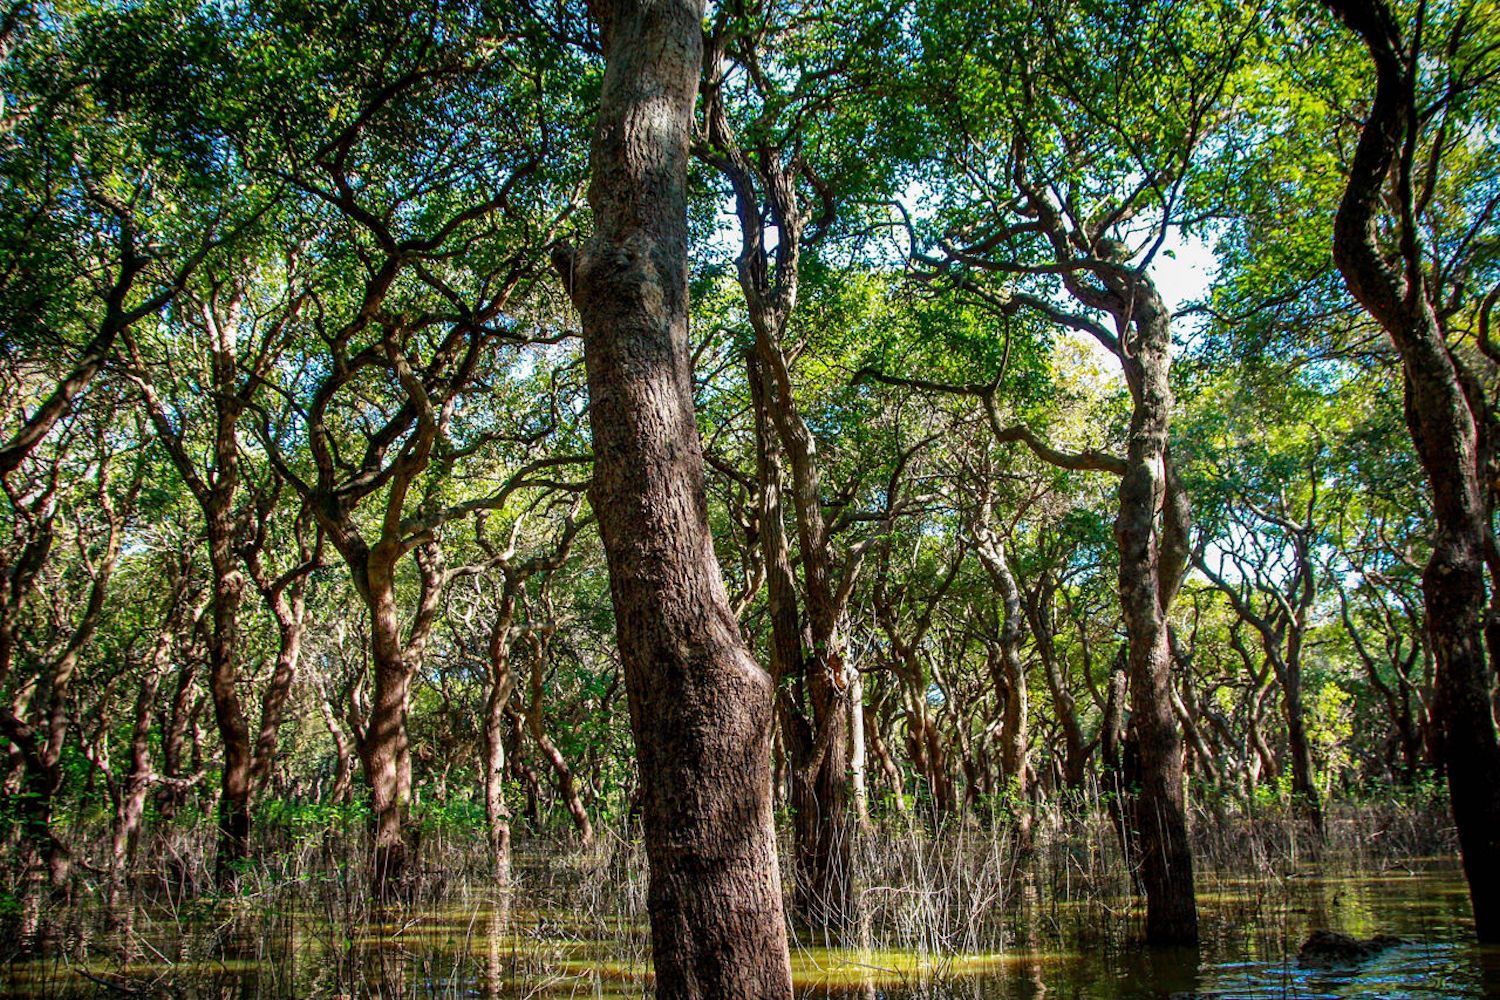 Solana: The Greenest Blockchain Taking Root with 5,000 Mangrove Trees